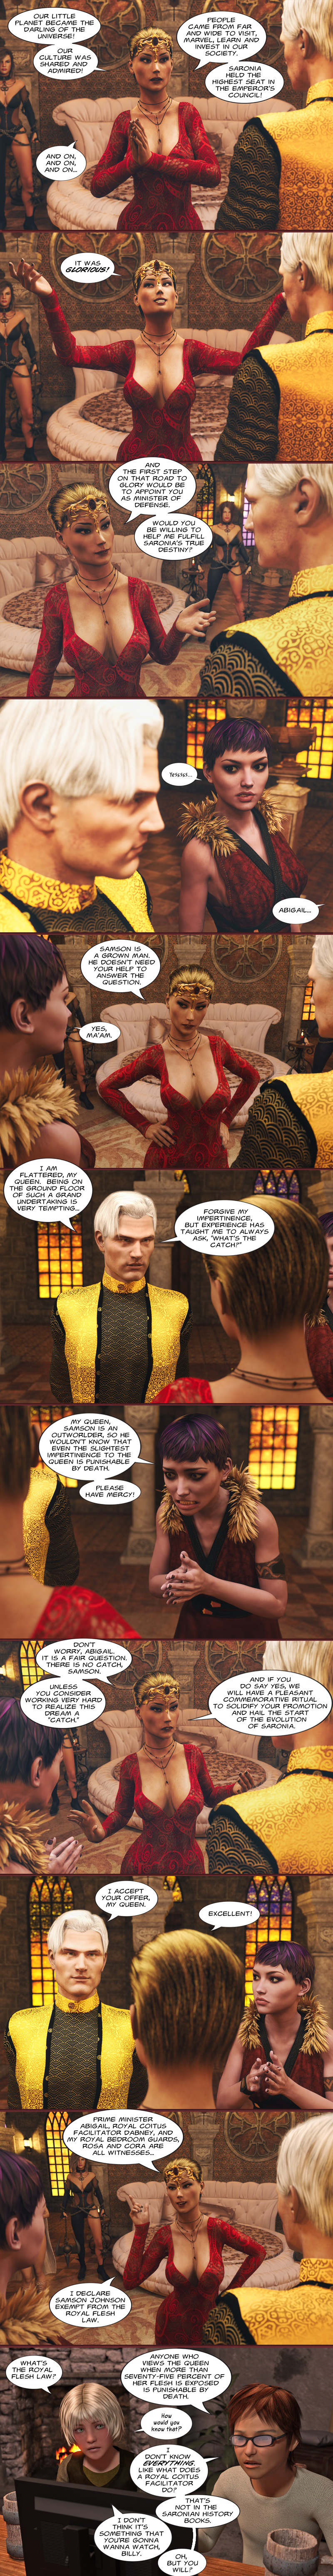 Chapter 18, page 8 – Royal Flesh Law defined